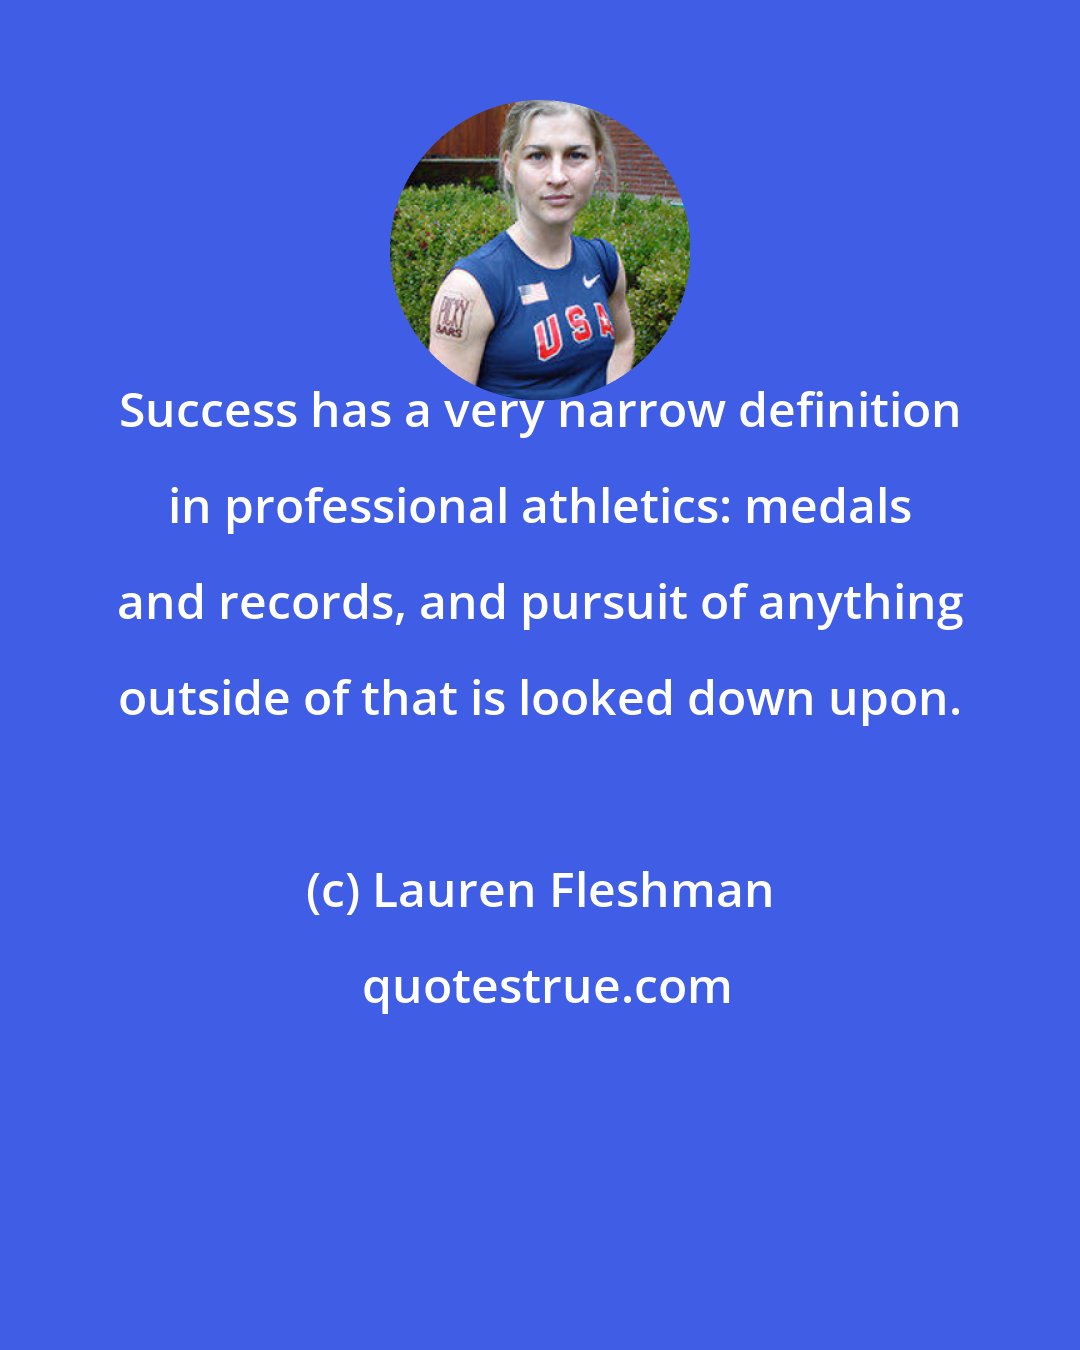 Lauren Fleshman: Success has a very narrow definition in professional athletics: medals and records, and pursuit of anything outside of that is looked down upon.